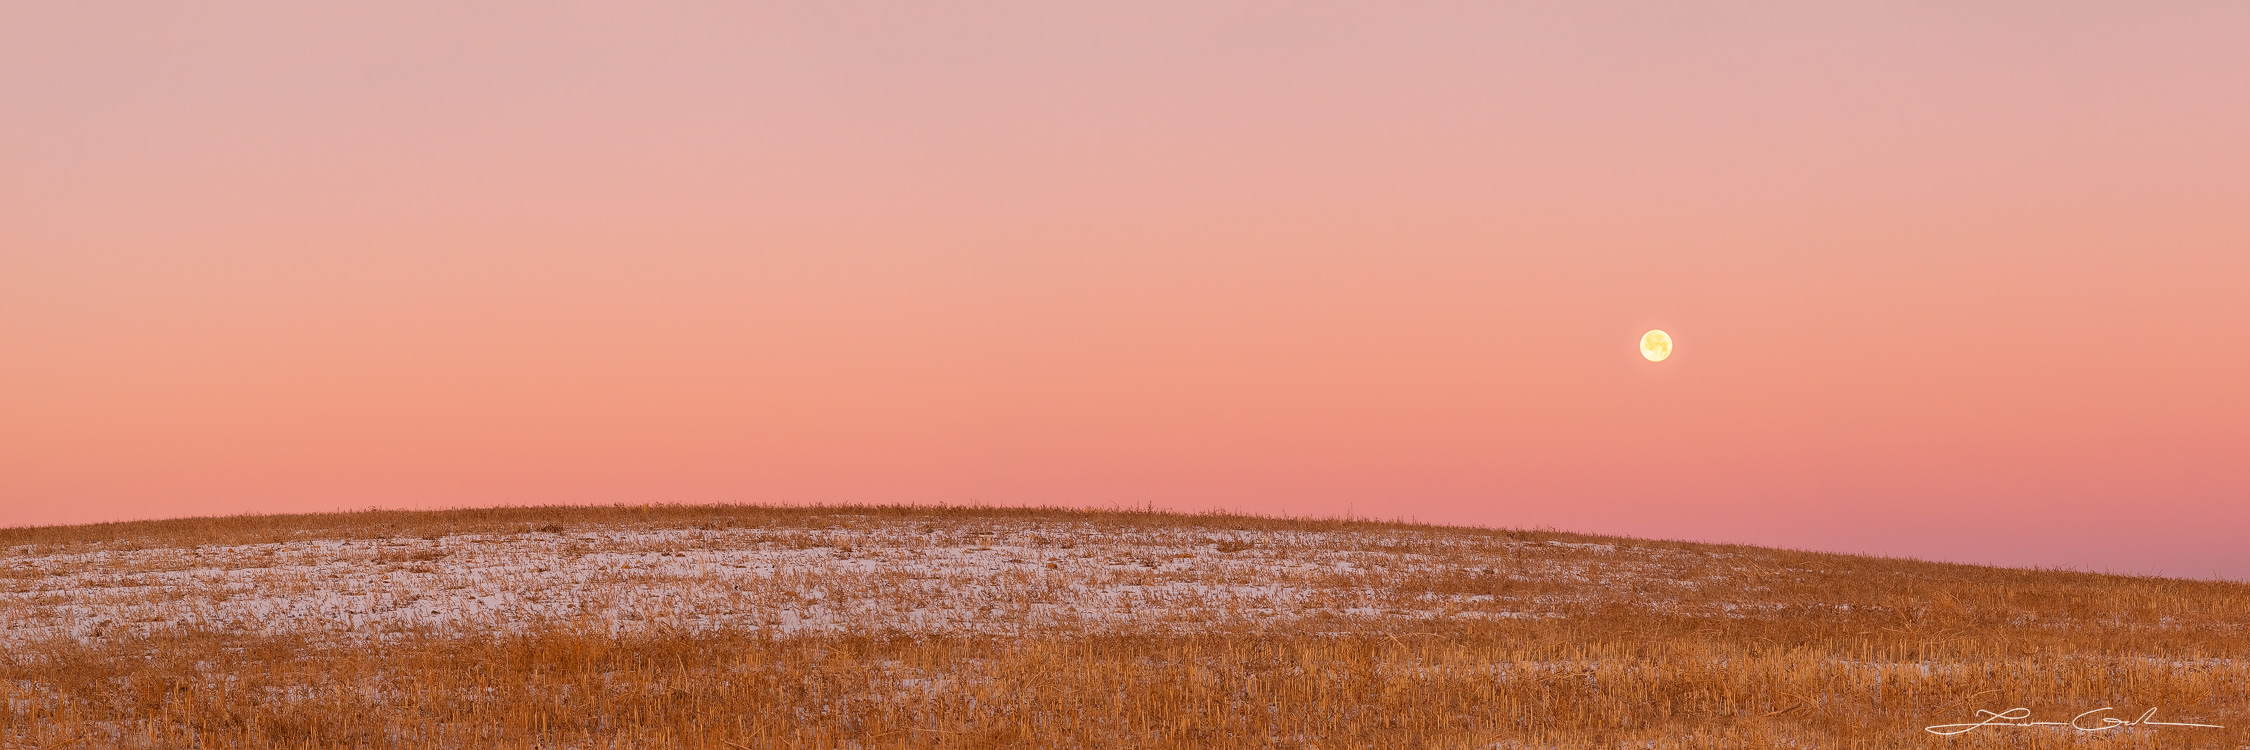 Full moon sunset in a pink sky over a simple landscape